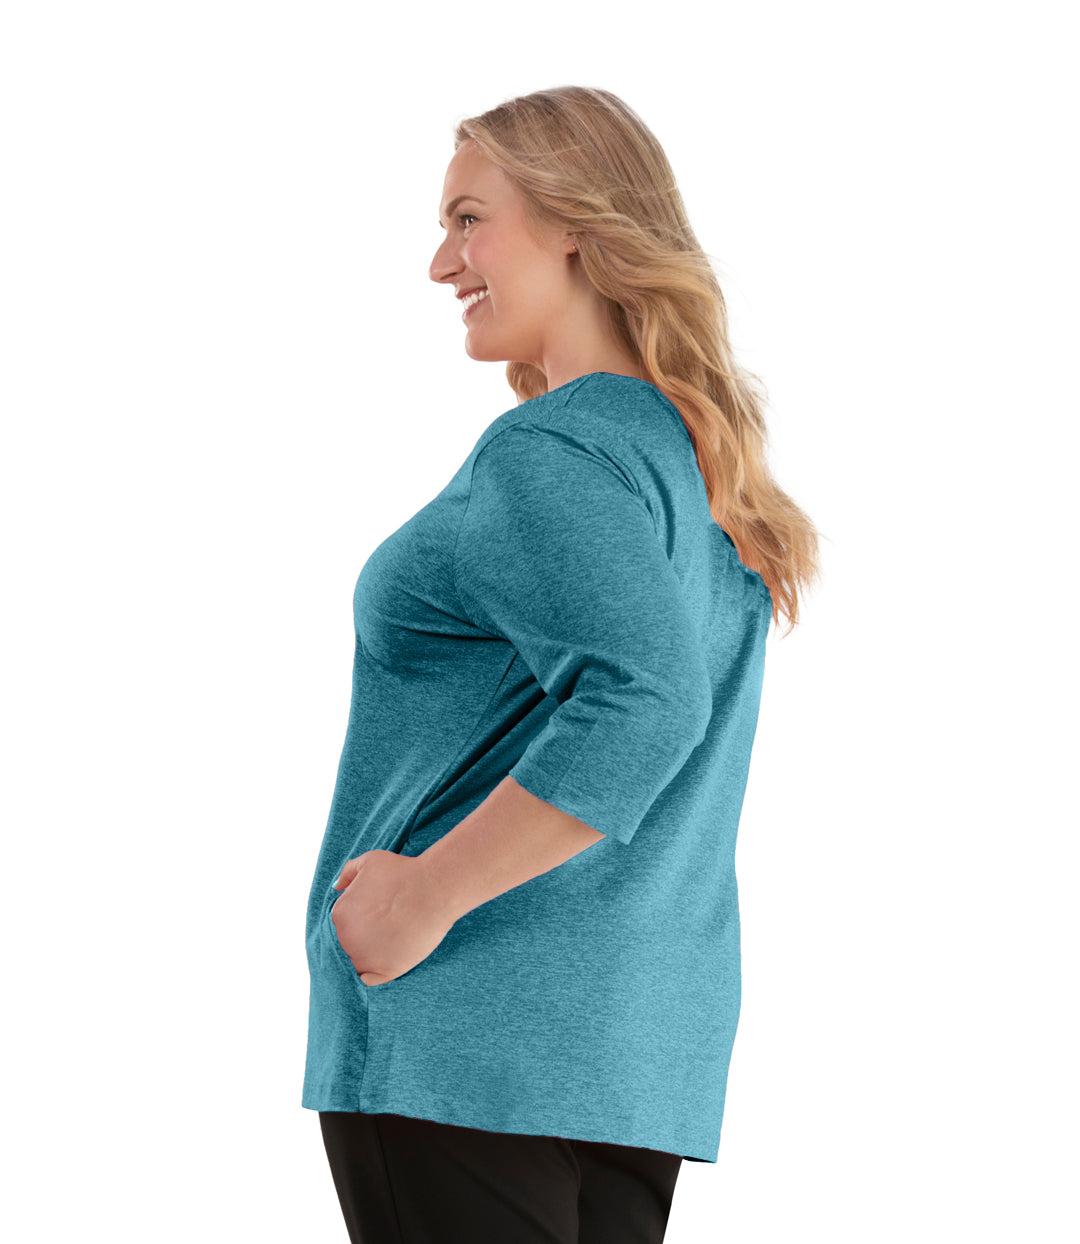 Plus size woman, facing left, wearing JunoActive plus size SoftWik V-Neck ¾ Sleeve Top with Pockets in the color Ocean Blue. She is wearing JunoActive Plus Size Leggings in the color Black.